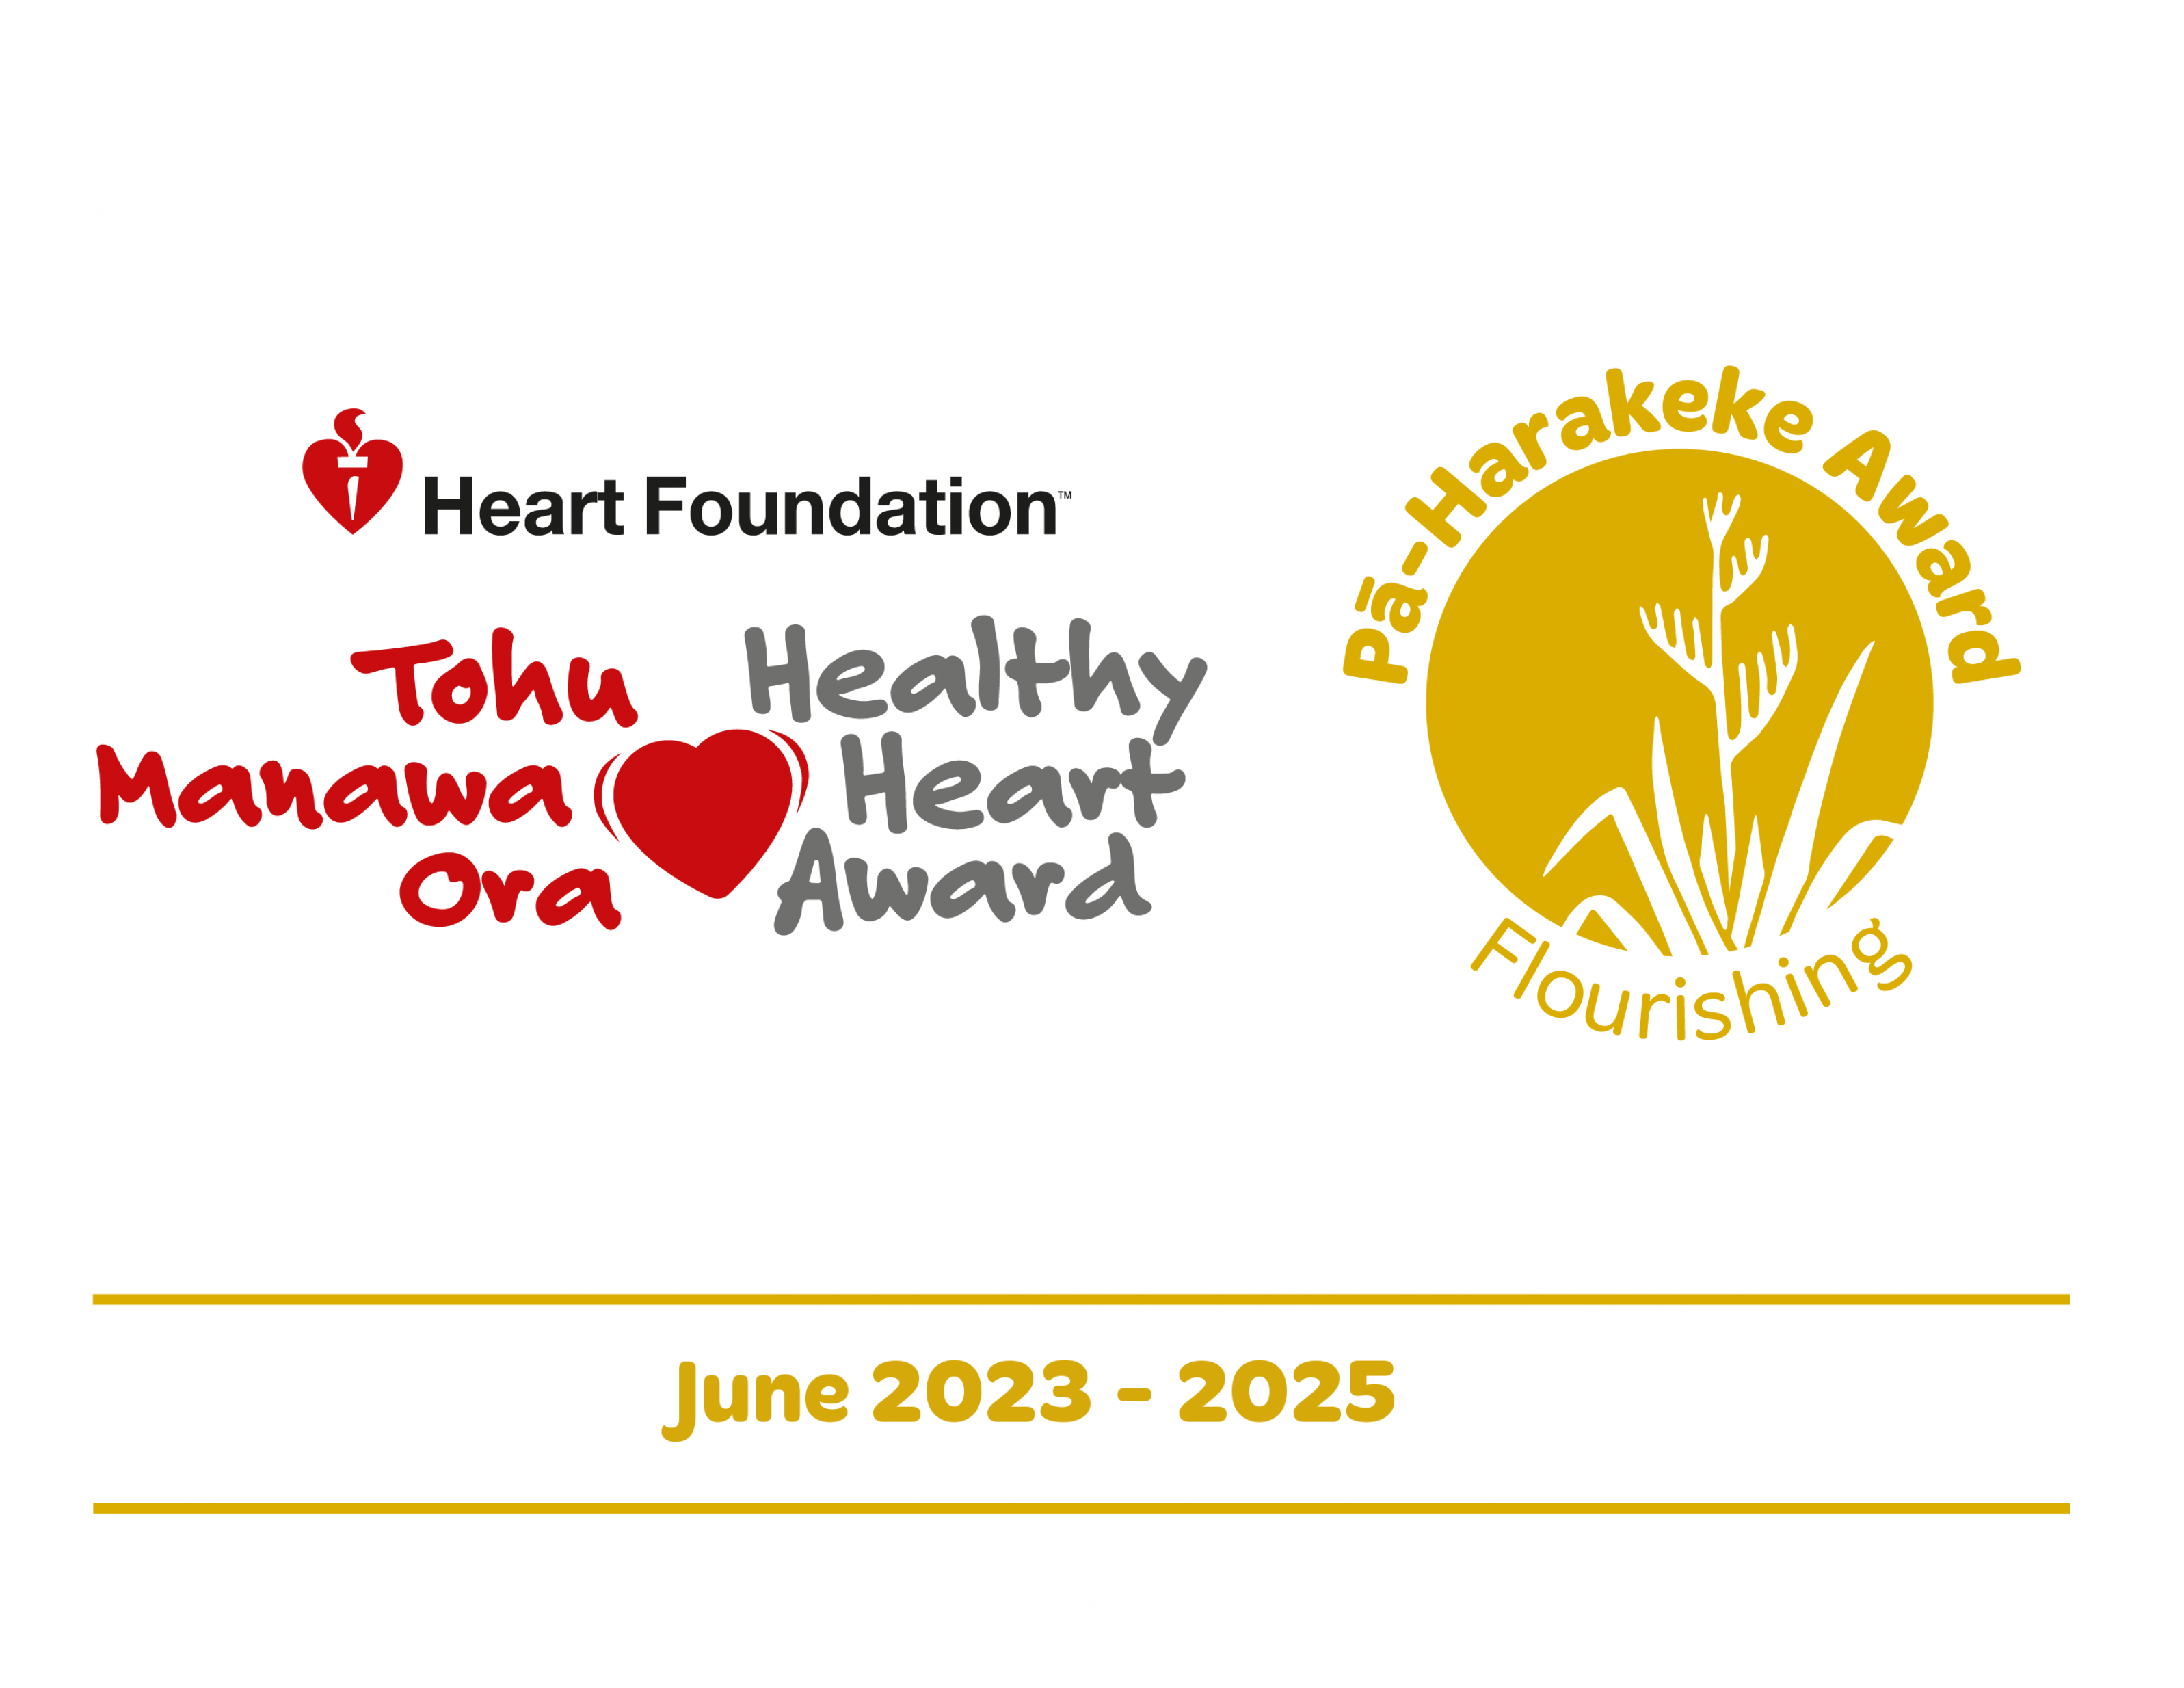 We have a Gold Healthy Heart Award